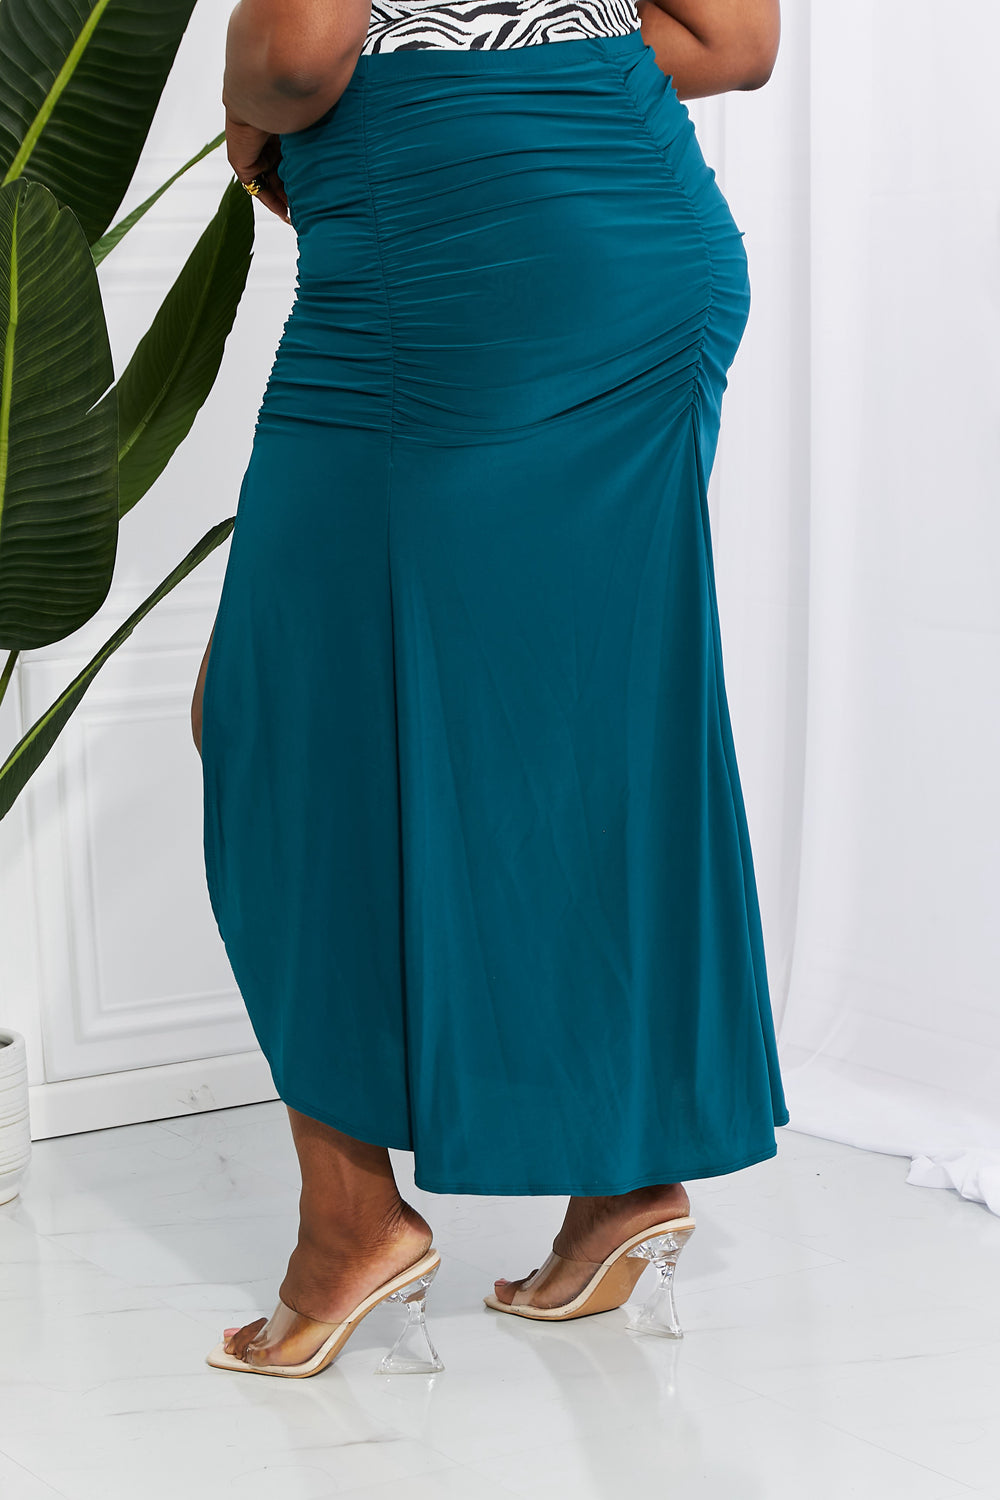 Up and Up: Ruched Slit Maxi Skirt in Teal | Skirt - CHANELIA